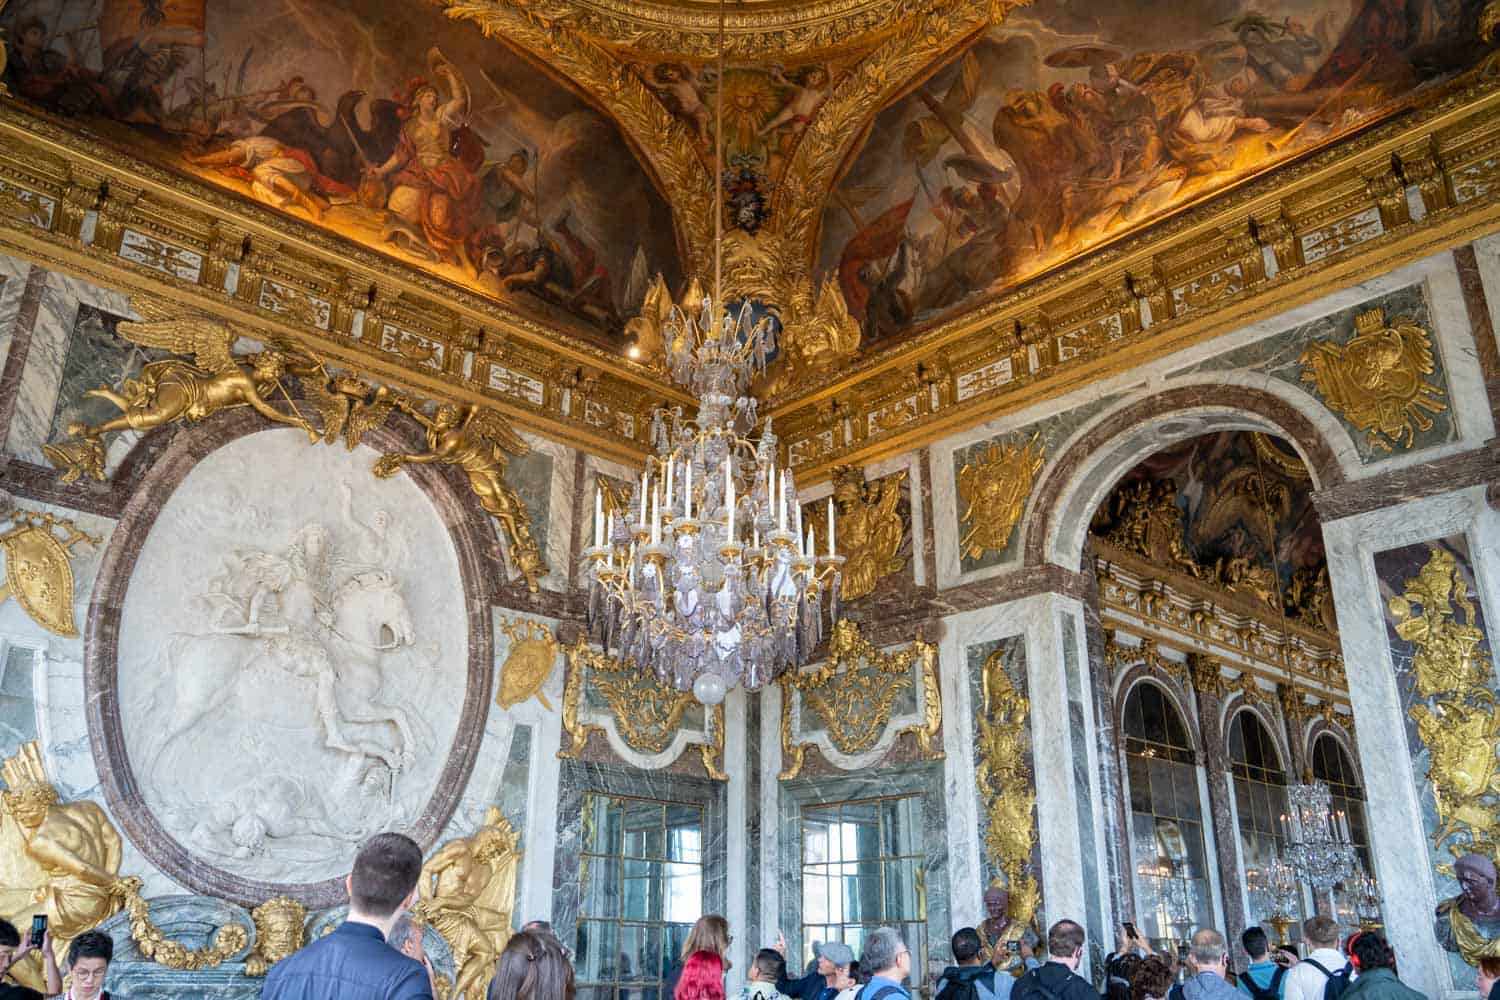 Inside the Palace of Versailles